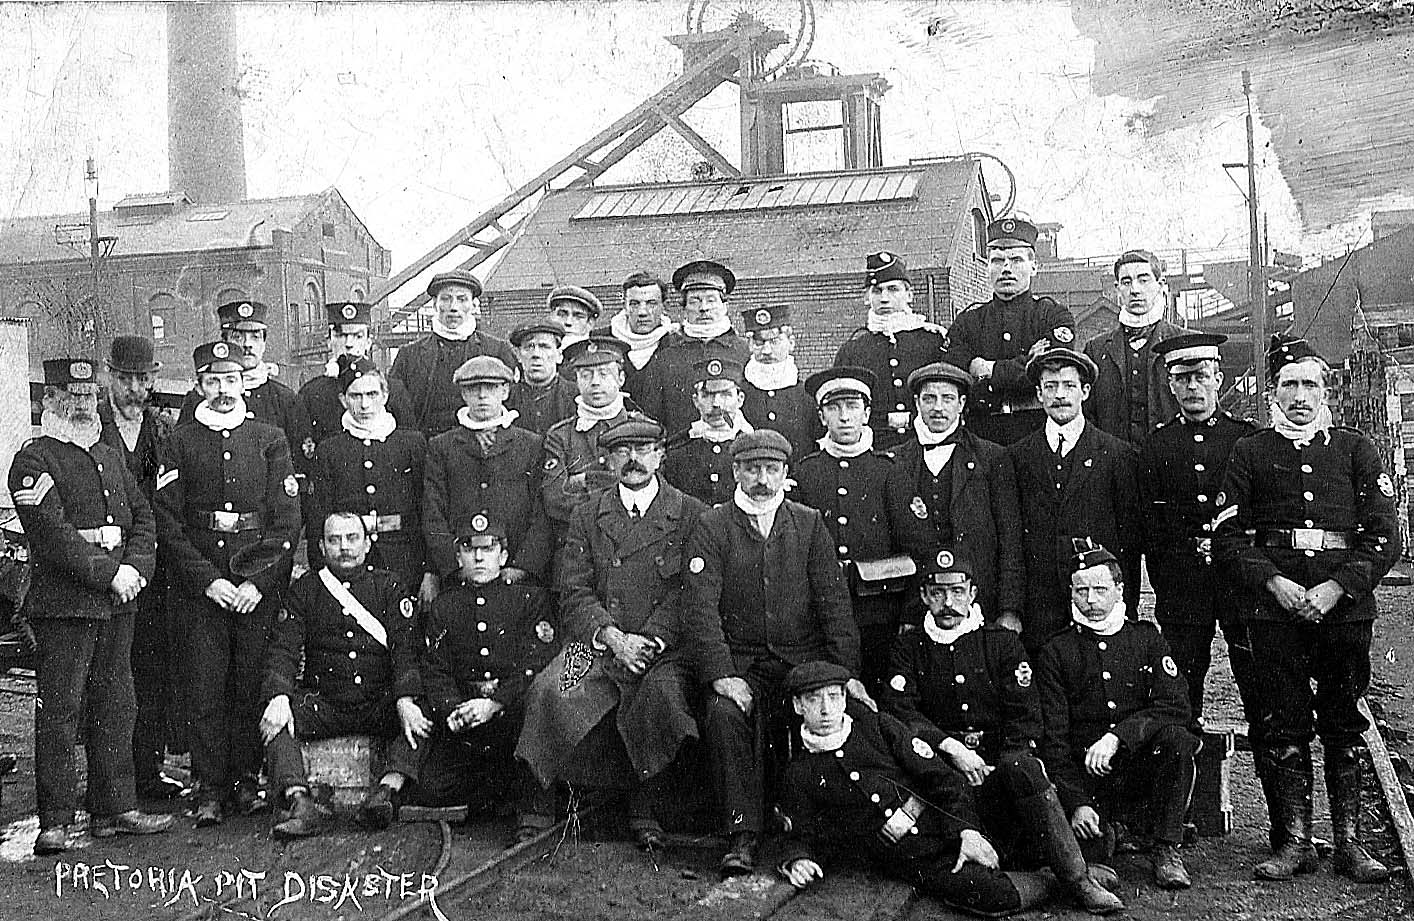 Dr Hatton (centre) and men of Westhoughton Ambulance
Brigade in front of the No.3 shaft headgear and engine house. Note the
white mufflers many are wearing - most probably to soak with eucalyptus oil
and pull over the face when dealing with the decomposing bodies in the
mortuary. Photo supplied by Maxine